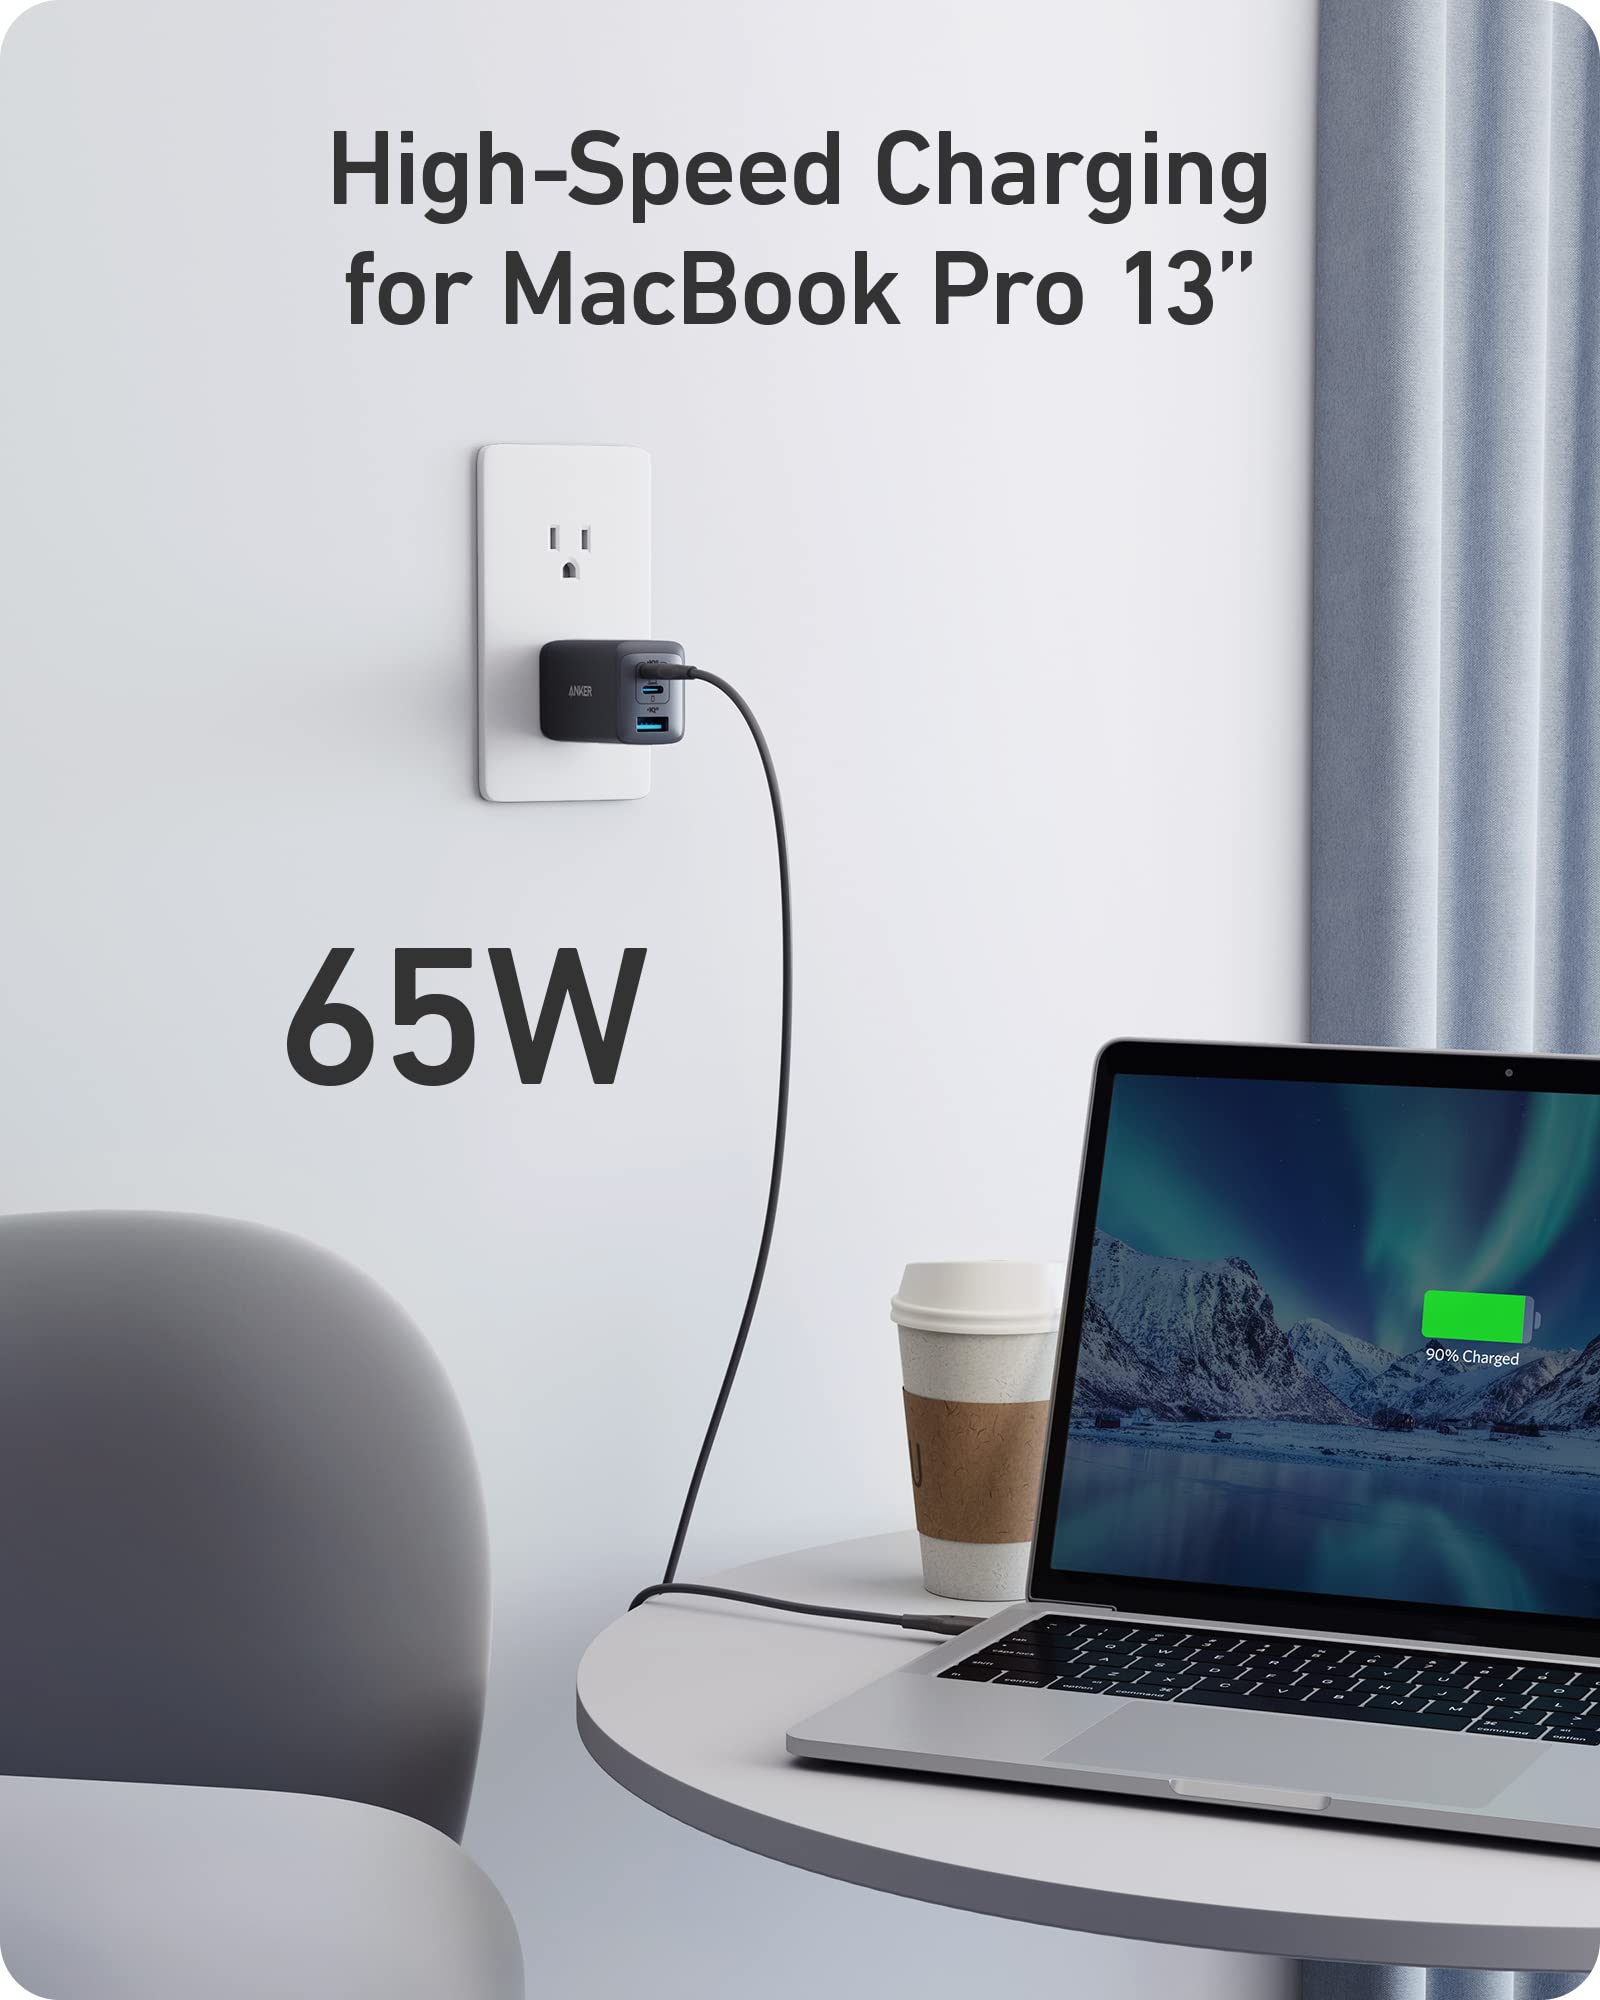 Anker USB C Charger, 735 Charger (Nano II 65W), iPad Charger, PPS 3-Port Fast Compact Foldable for MacBook Pro/Air, iPad Pro, Galaxy S23, Dell XPS 13, Note 20/10+, iPhone 14/Pro, Steam Deck, and More